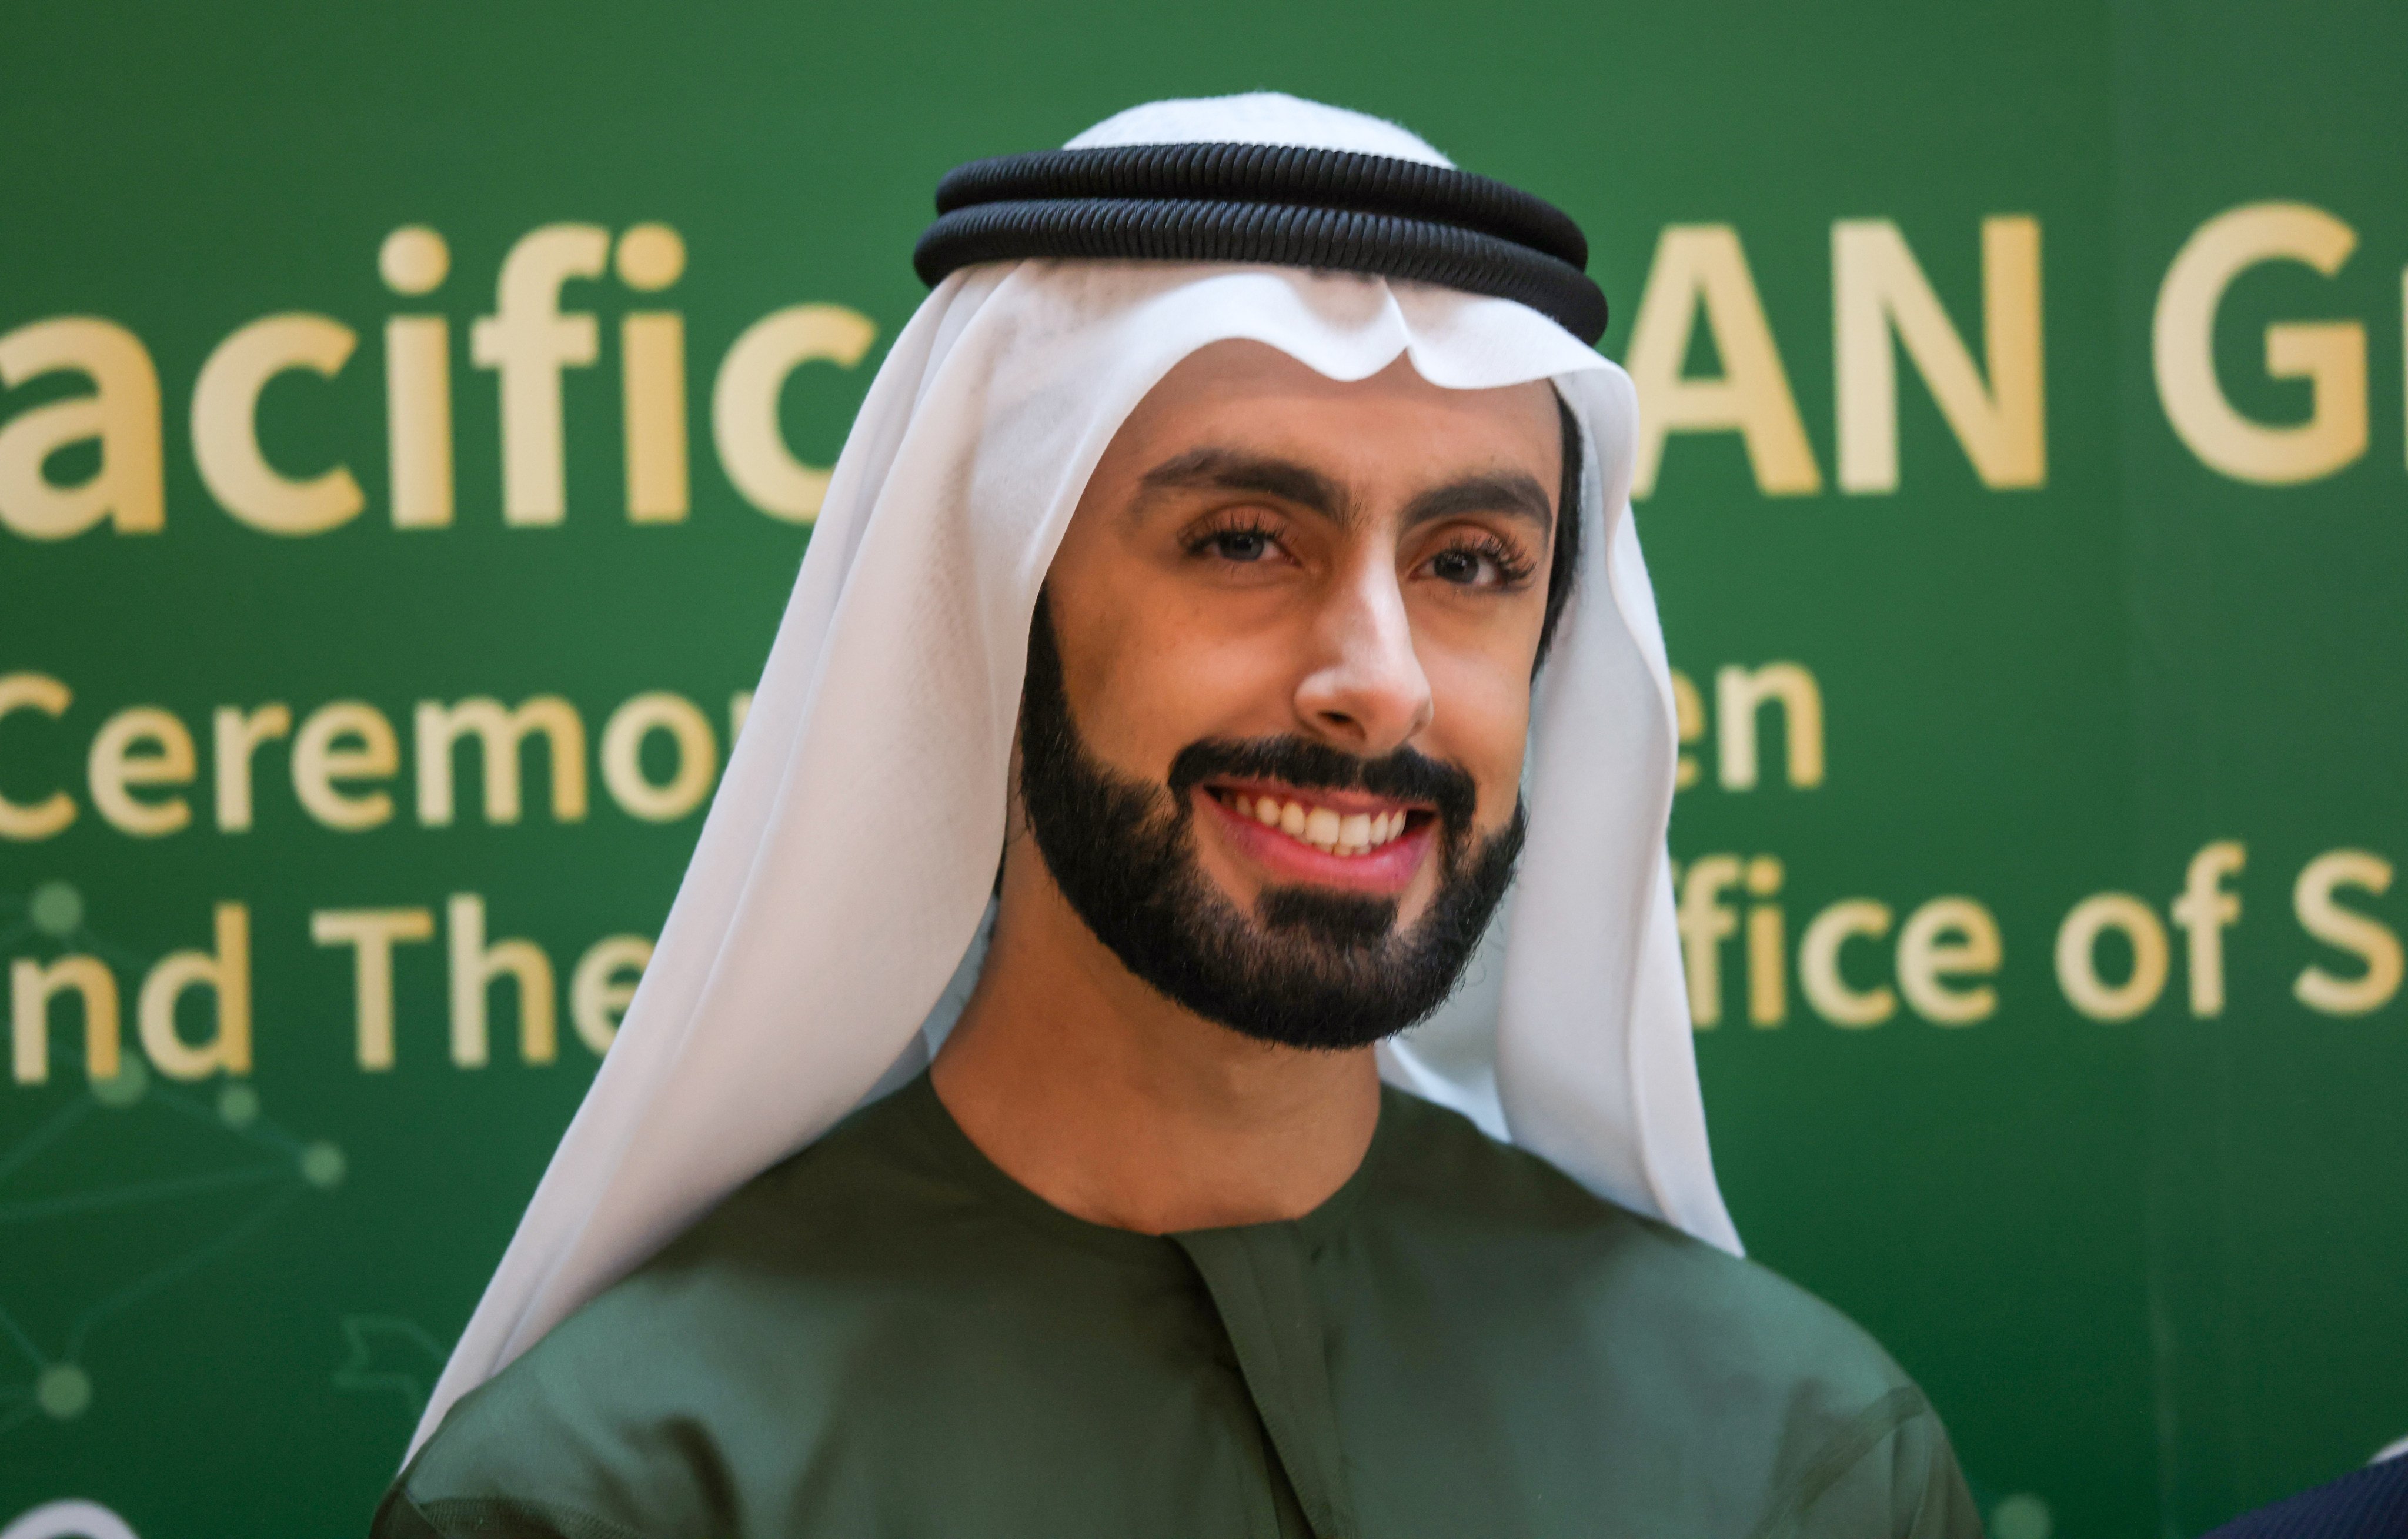 Sheikh Ali Al Maktoum was thrust into the media spotlight after calling off the inauguration ceremony for a US$500 million family office in Hong Kong at the eleventh hour in March. Photo: Yik Yeung-man